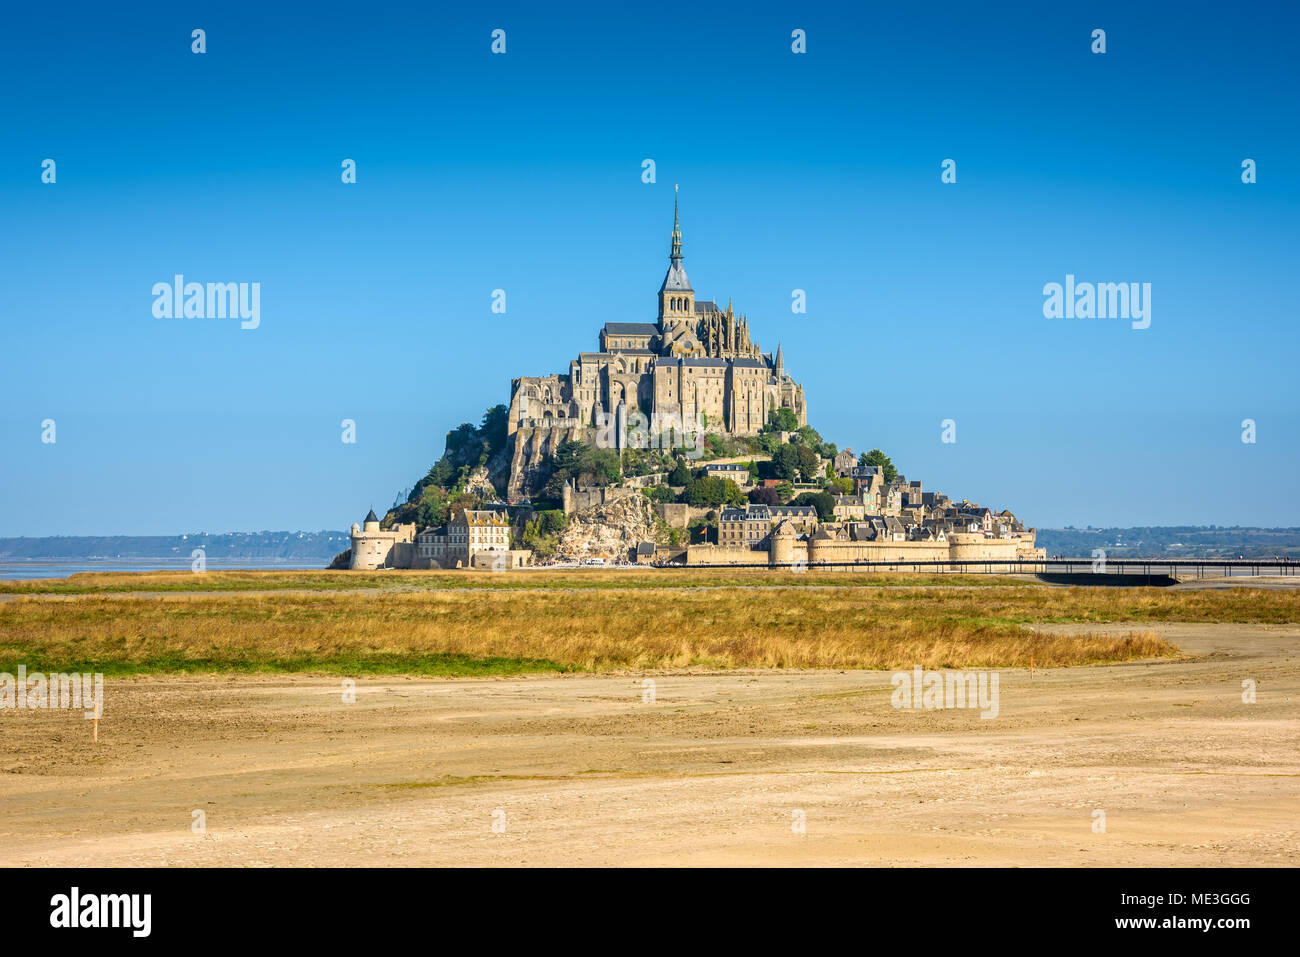 Mont Saint Michel monastery abbey on the island in Normandy, Northern France Stock Photo